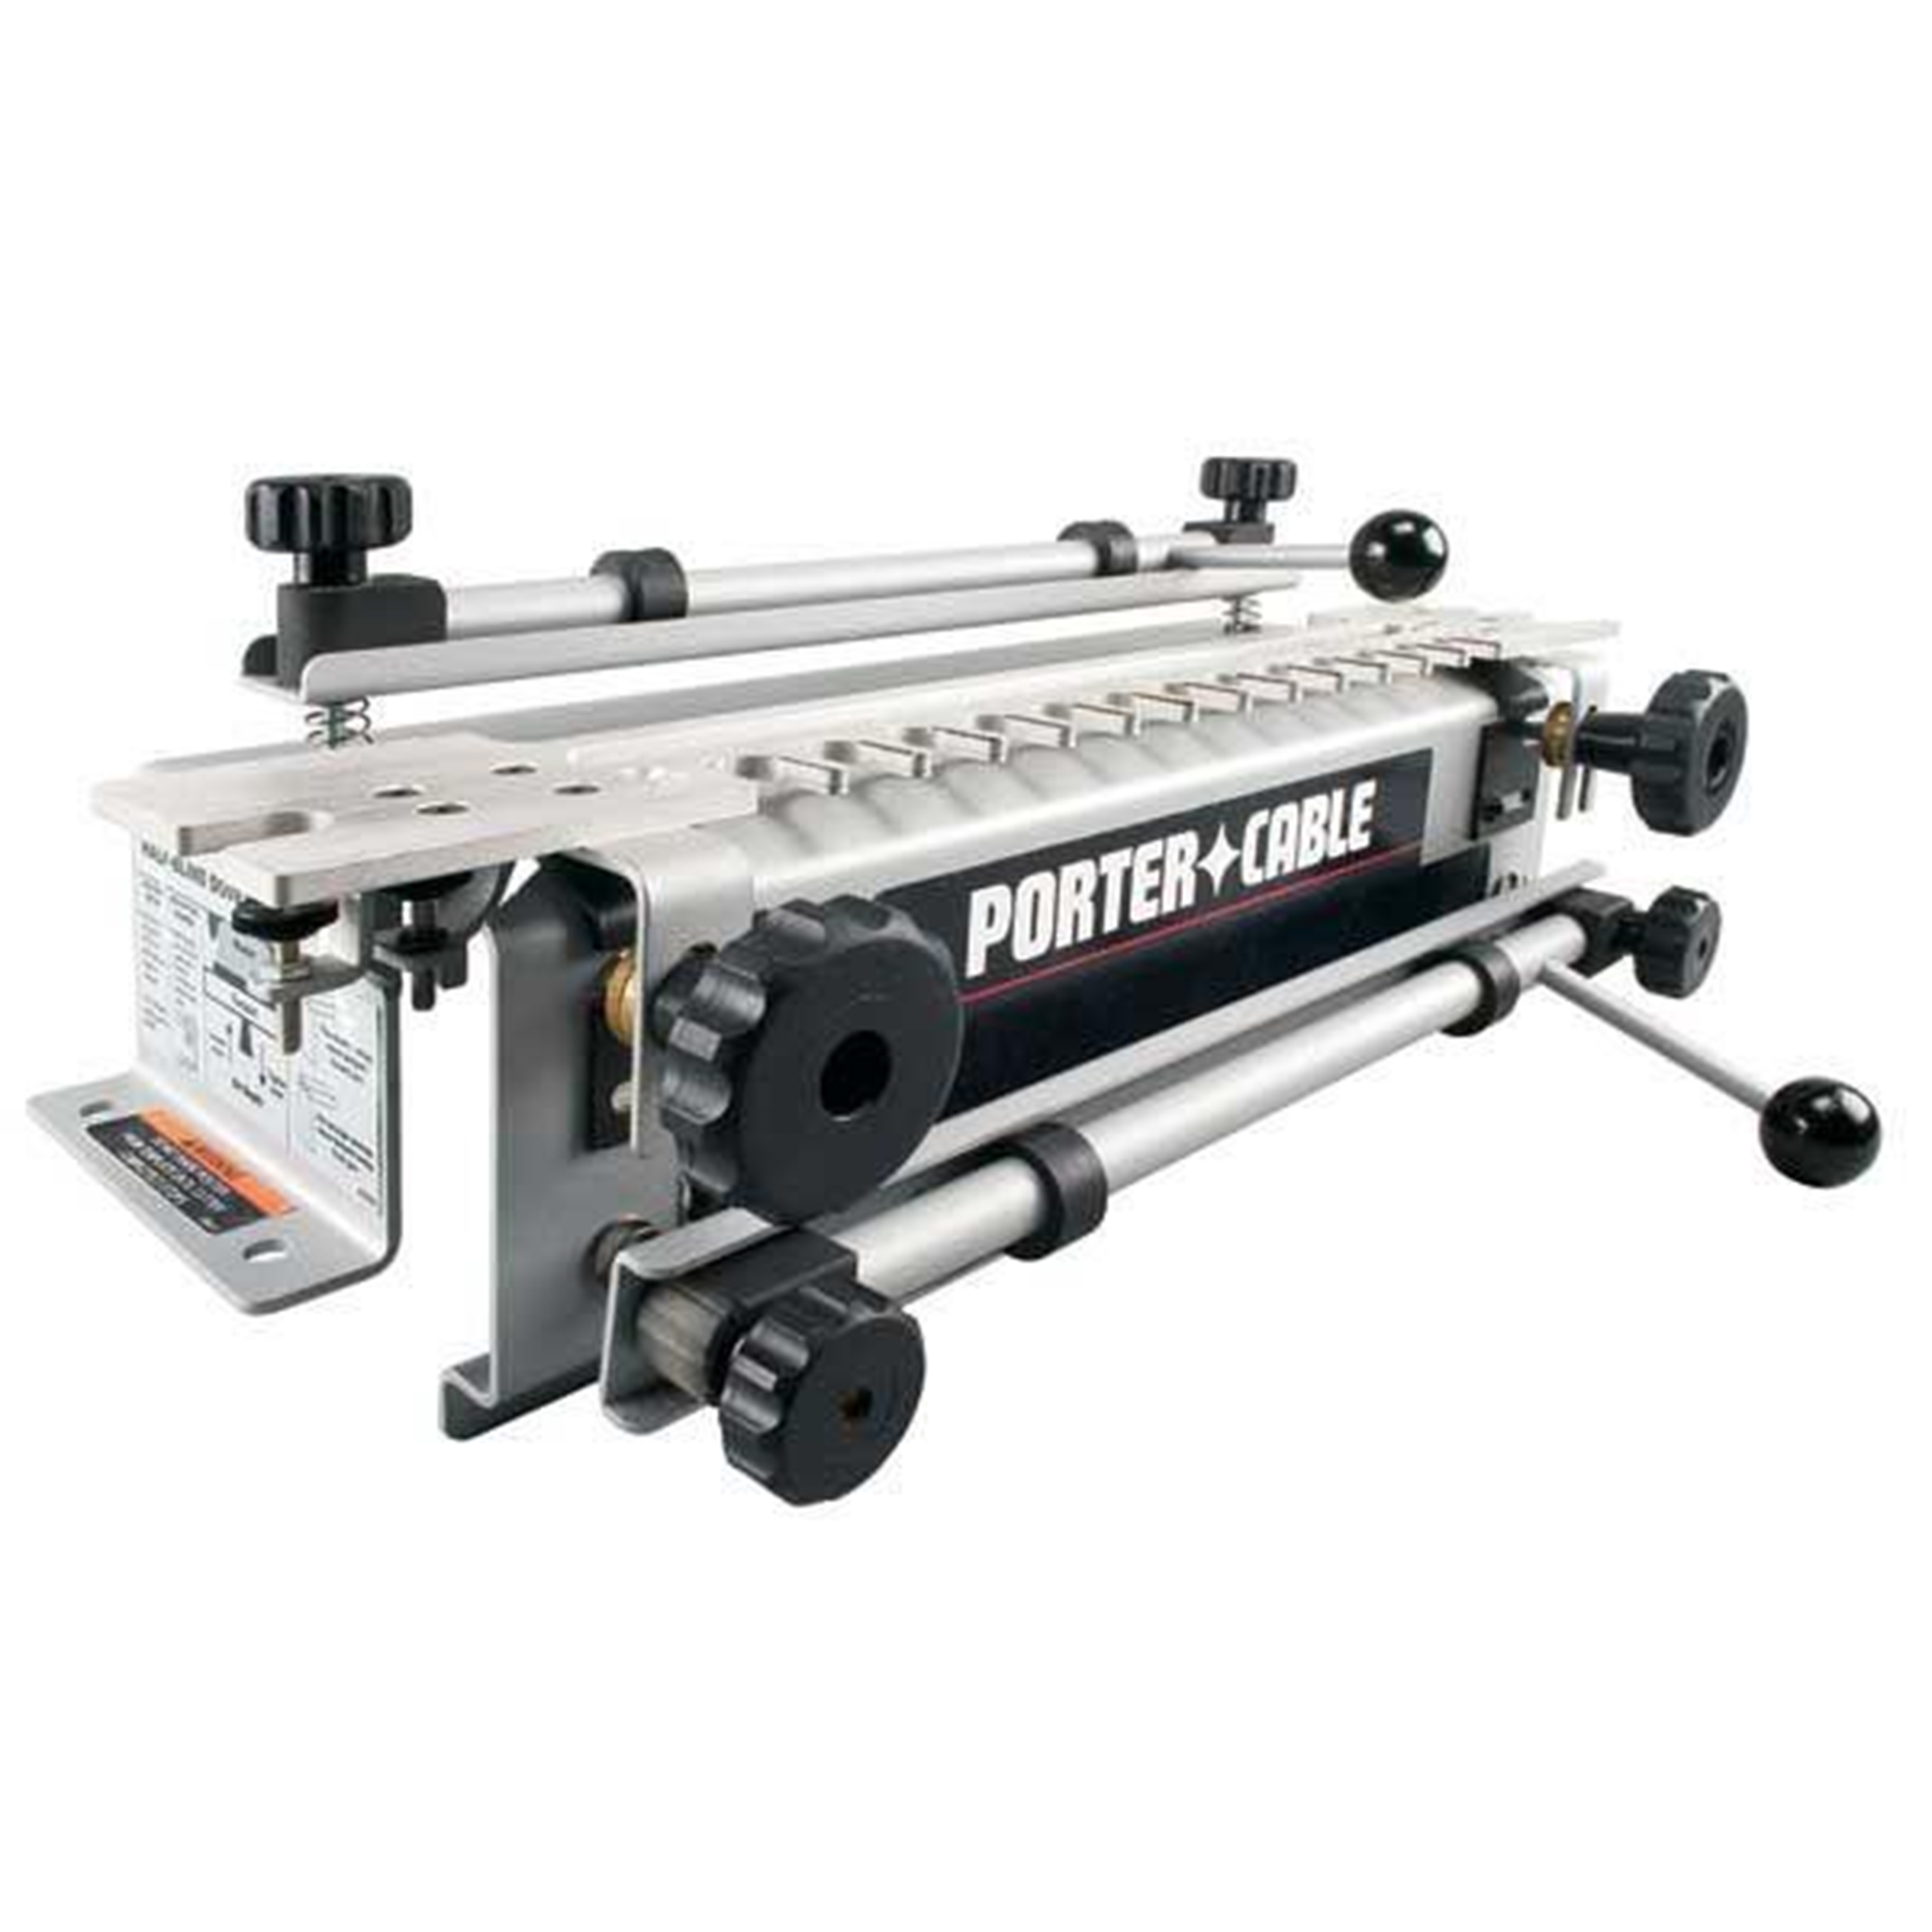 Porter-cable 12" Deluxe Dovetail Jig Combination Kit, Model 4216